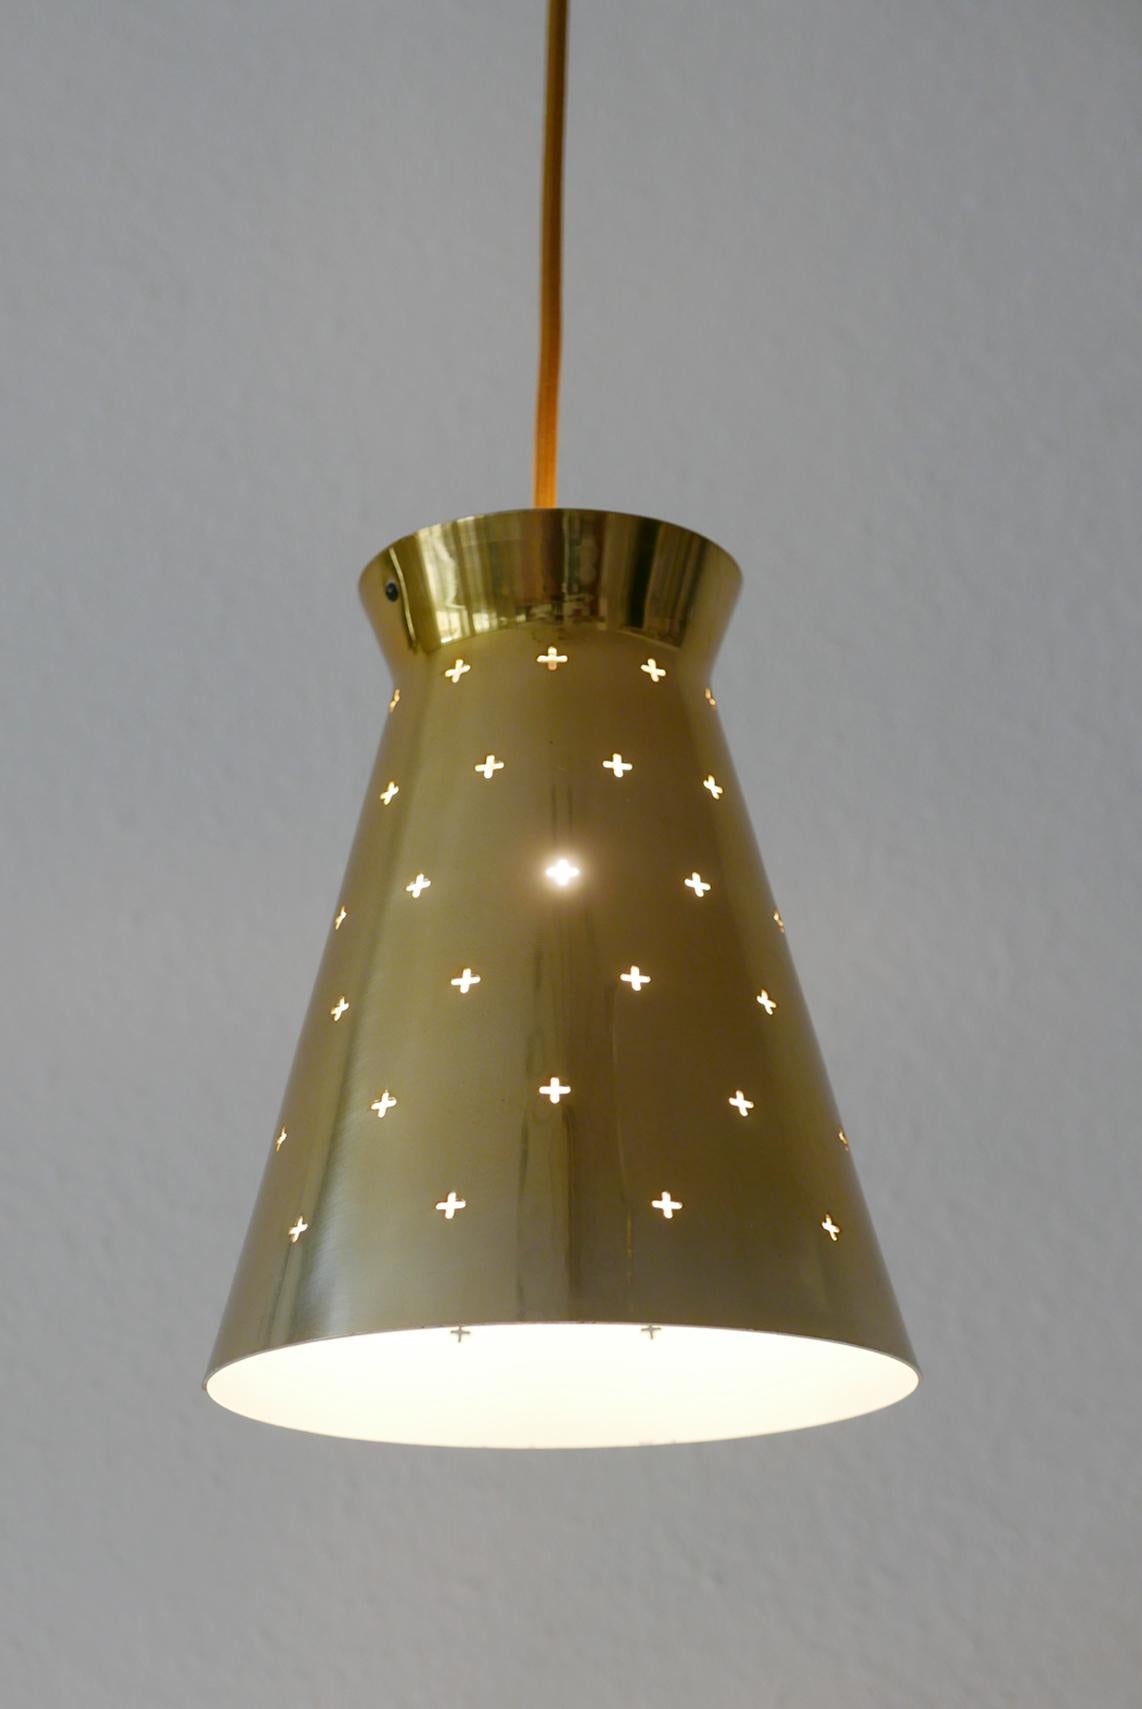 Lovely Mid-Century Modern Diabolo Pendant Lamp by Hillebrand, 1950s, Germany For Sale 3